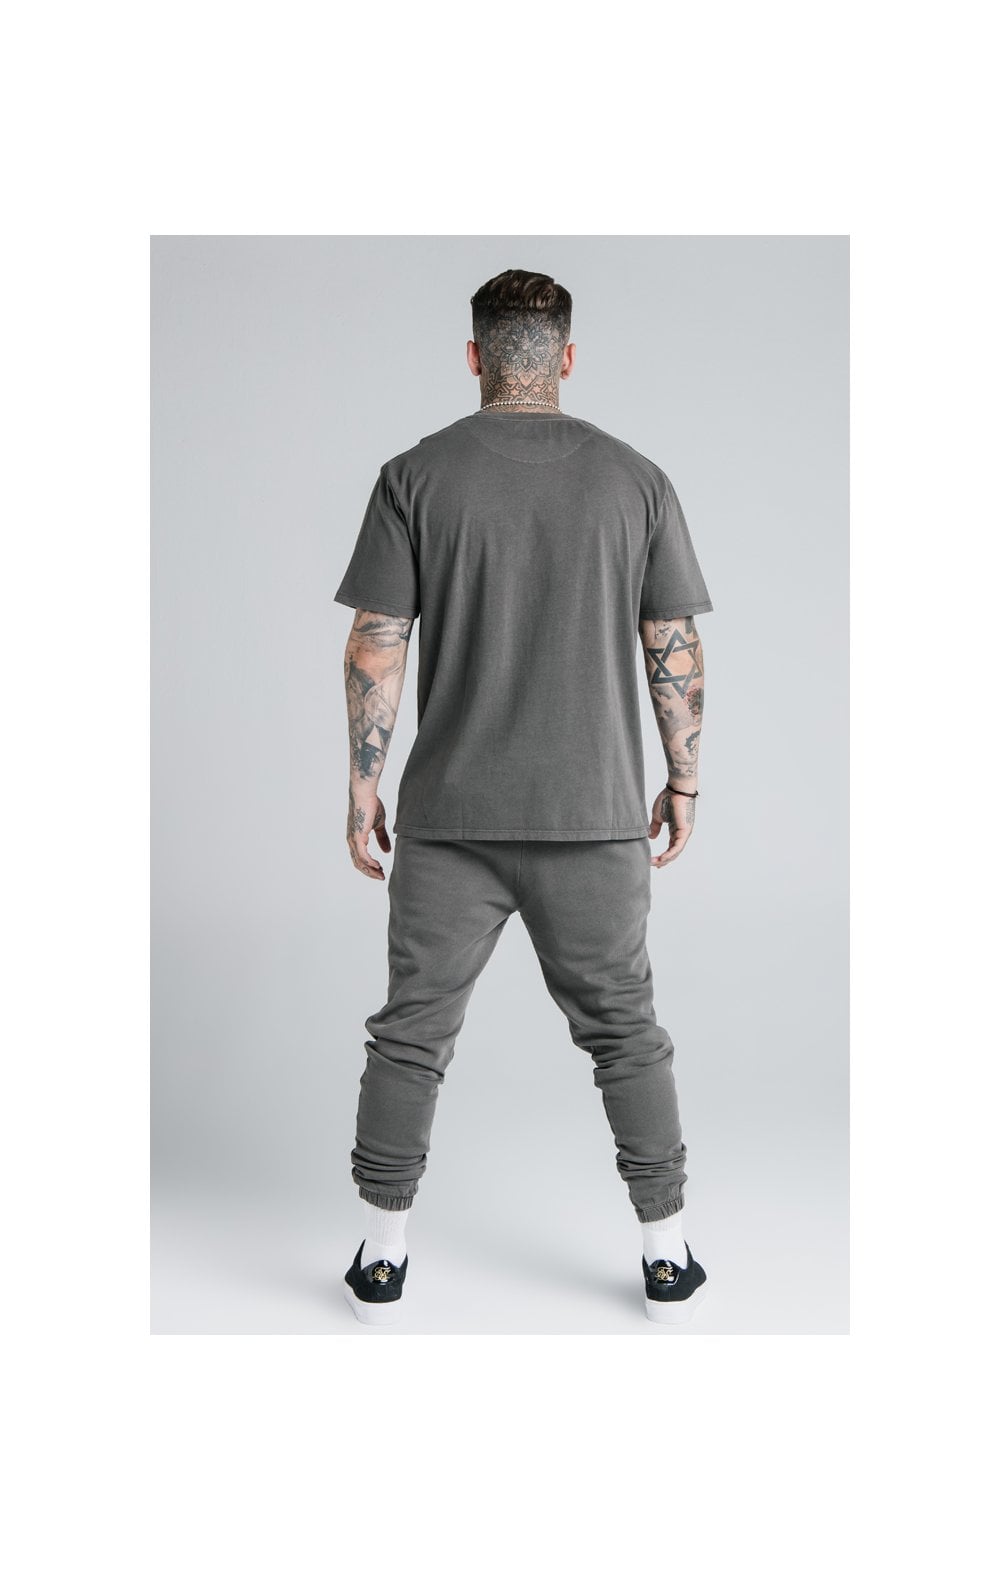 SikSilk X Steve Aoki S/S Oversize Essential Tee – Washed Grey (7)